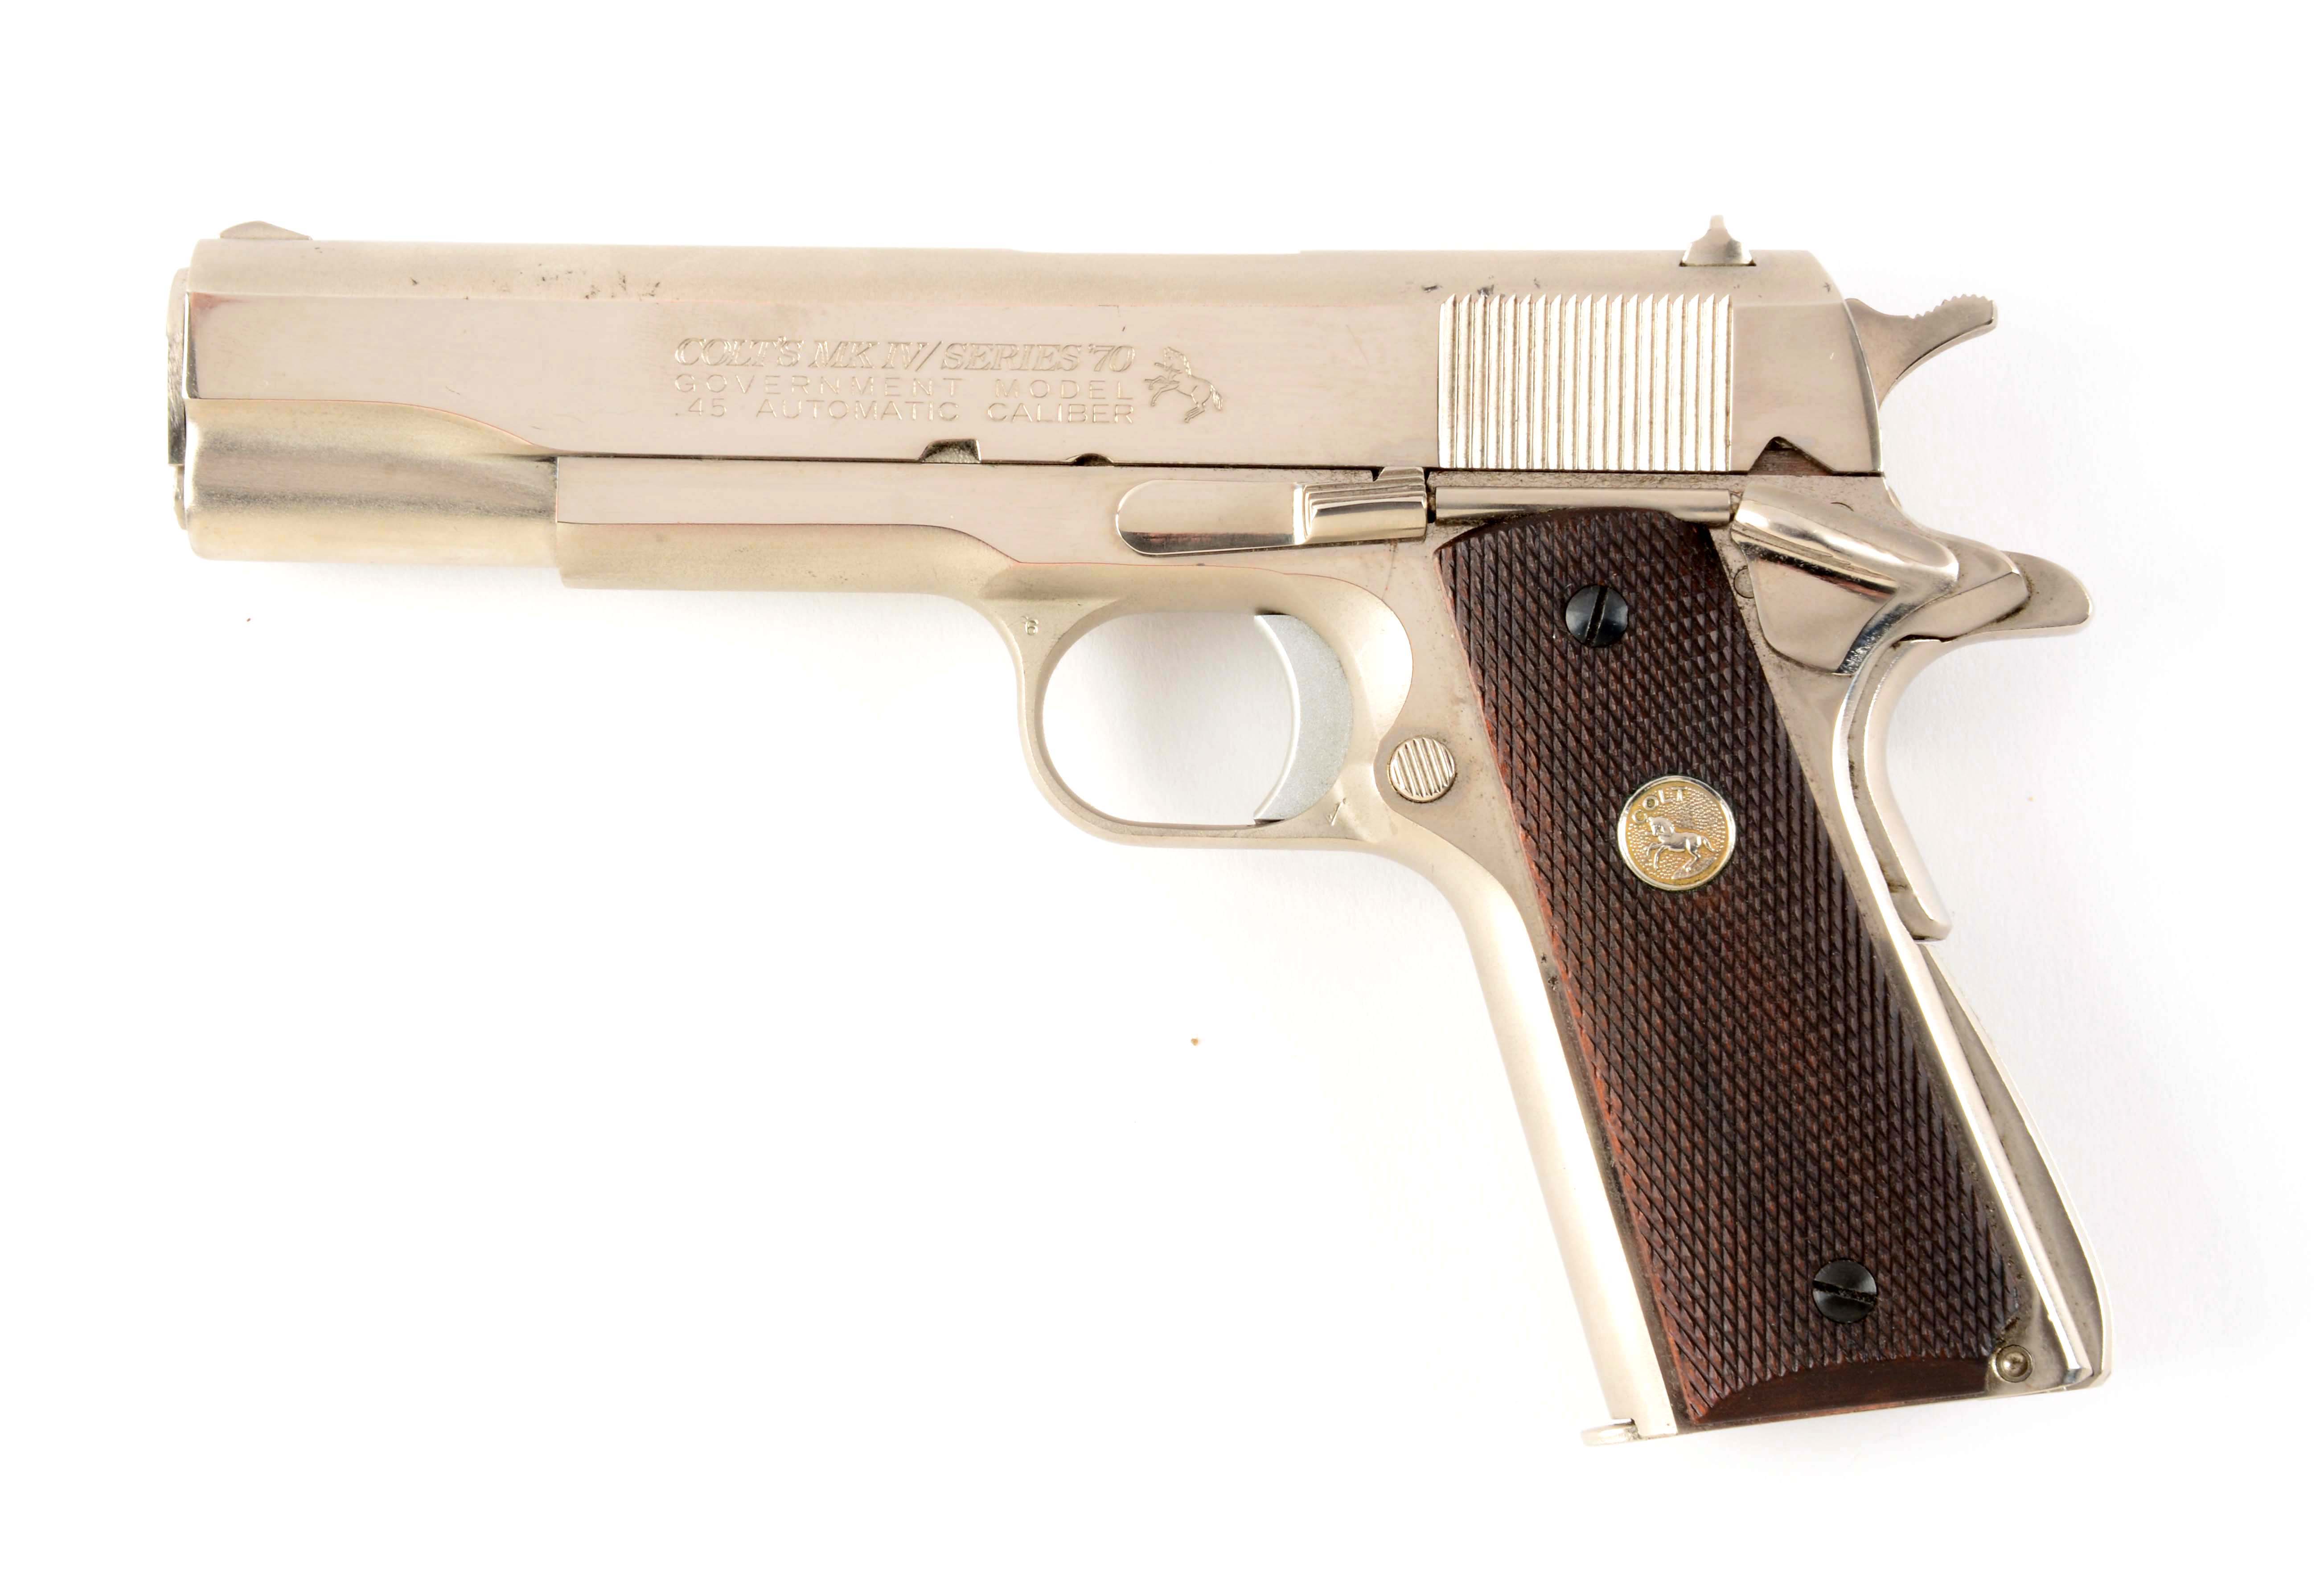 colt 1911 a1 serial numbers